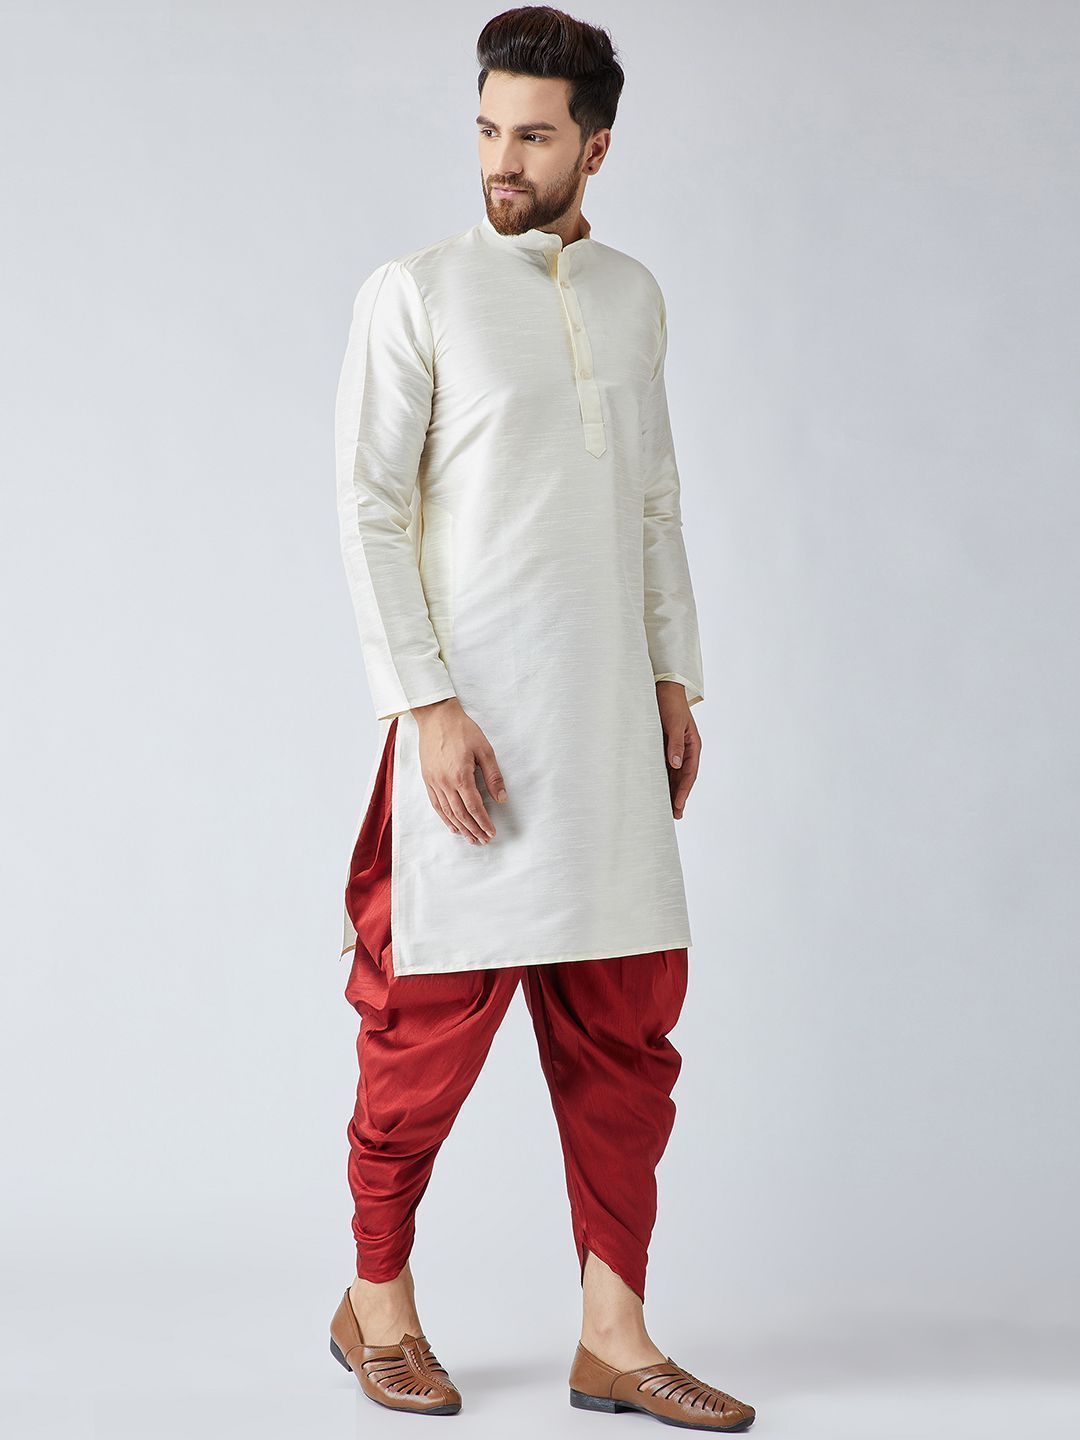 [Available] Off-White and Red Kurta with Harem Pants